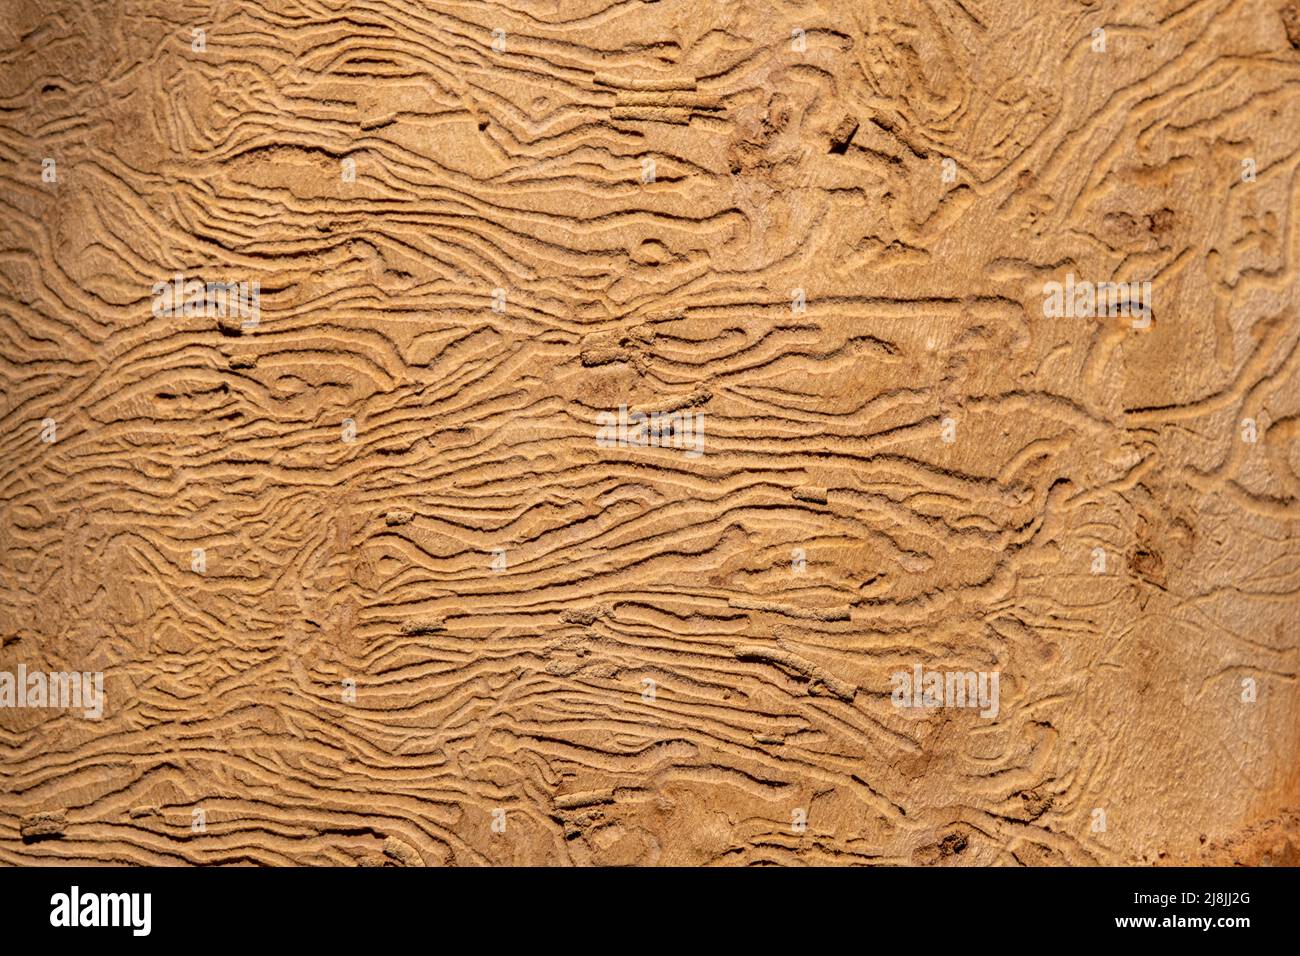 wood affected with woodworm. damaged tree trunk texture with natural mottled labyrinth. closeup view Stock Photo